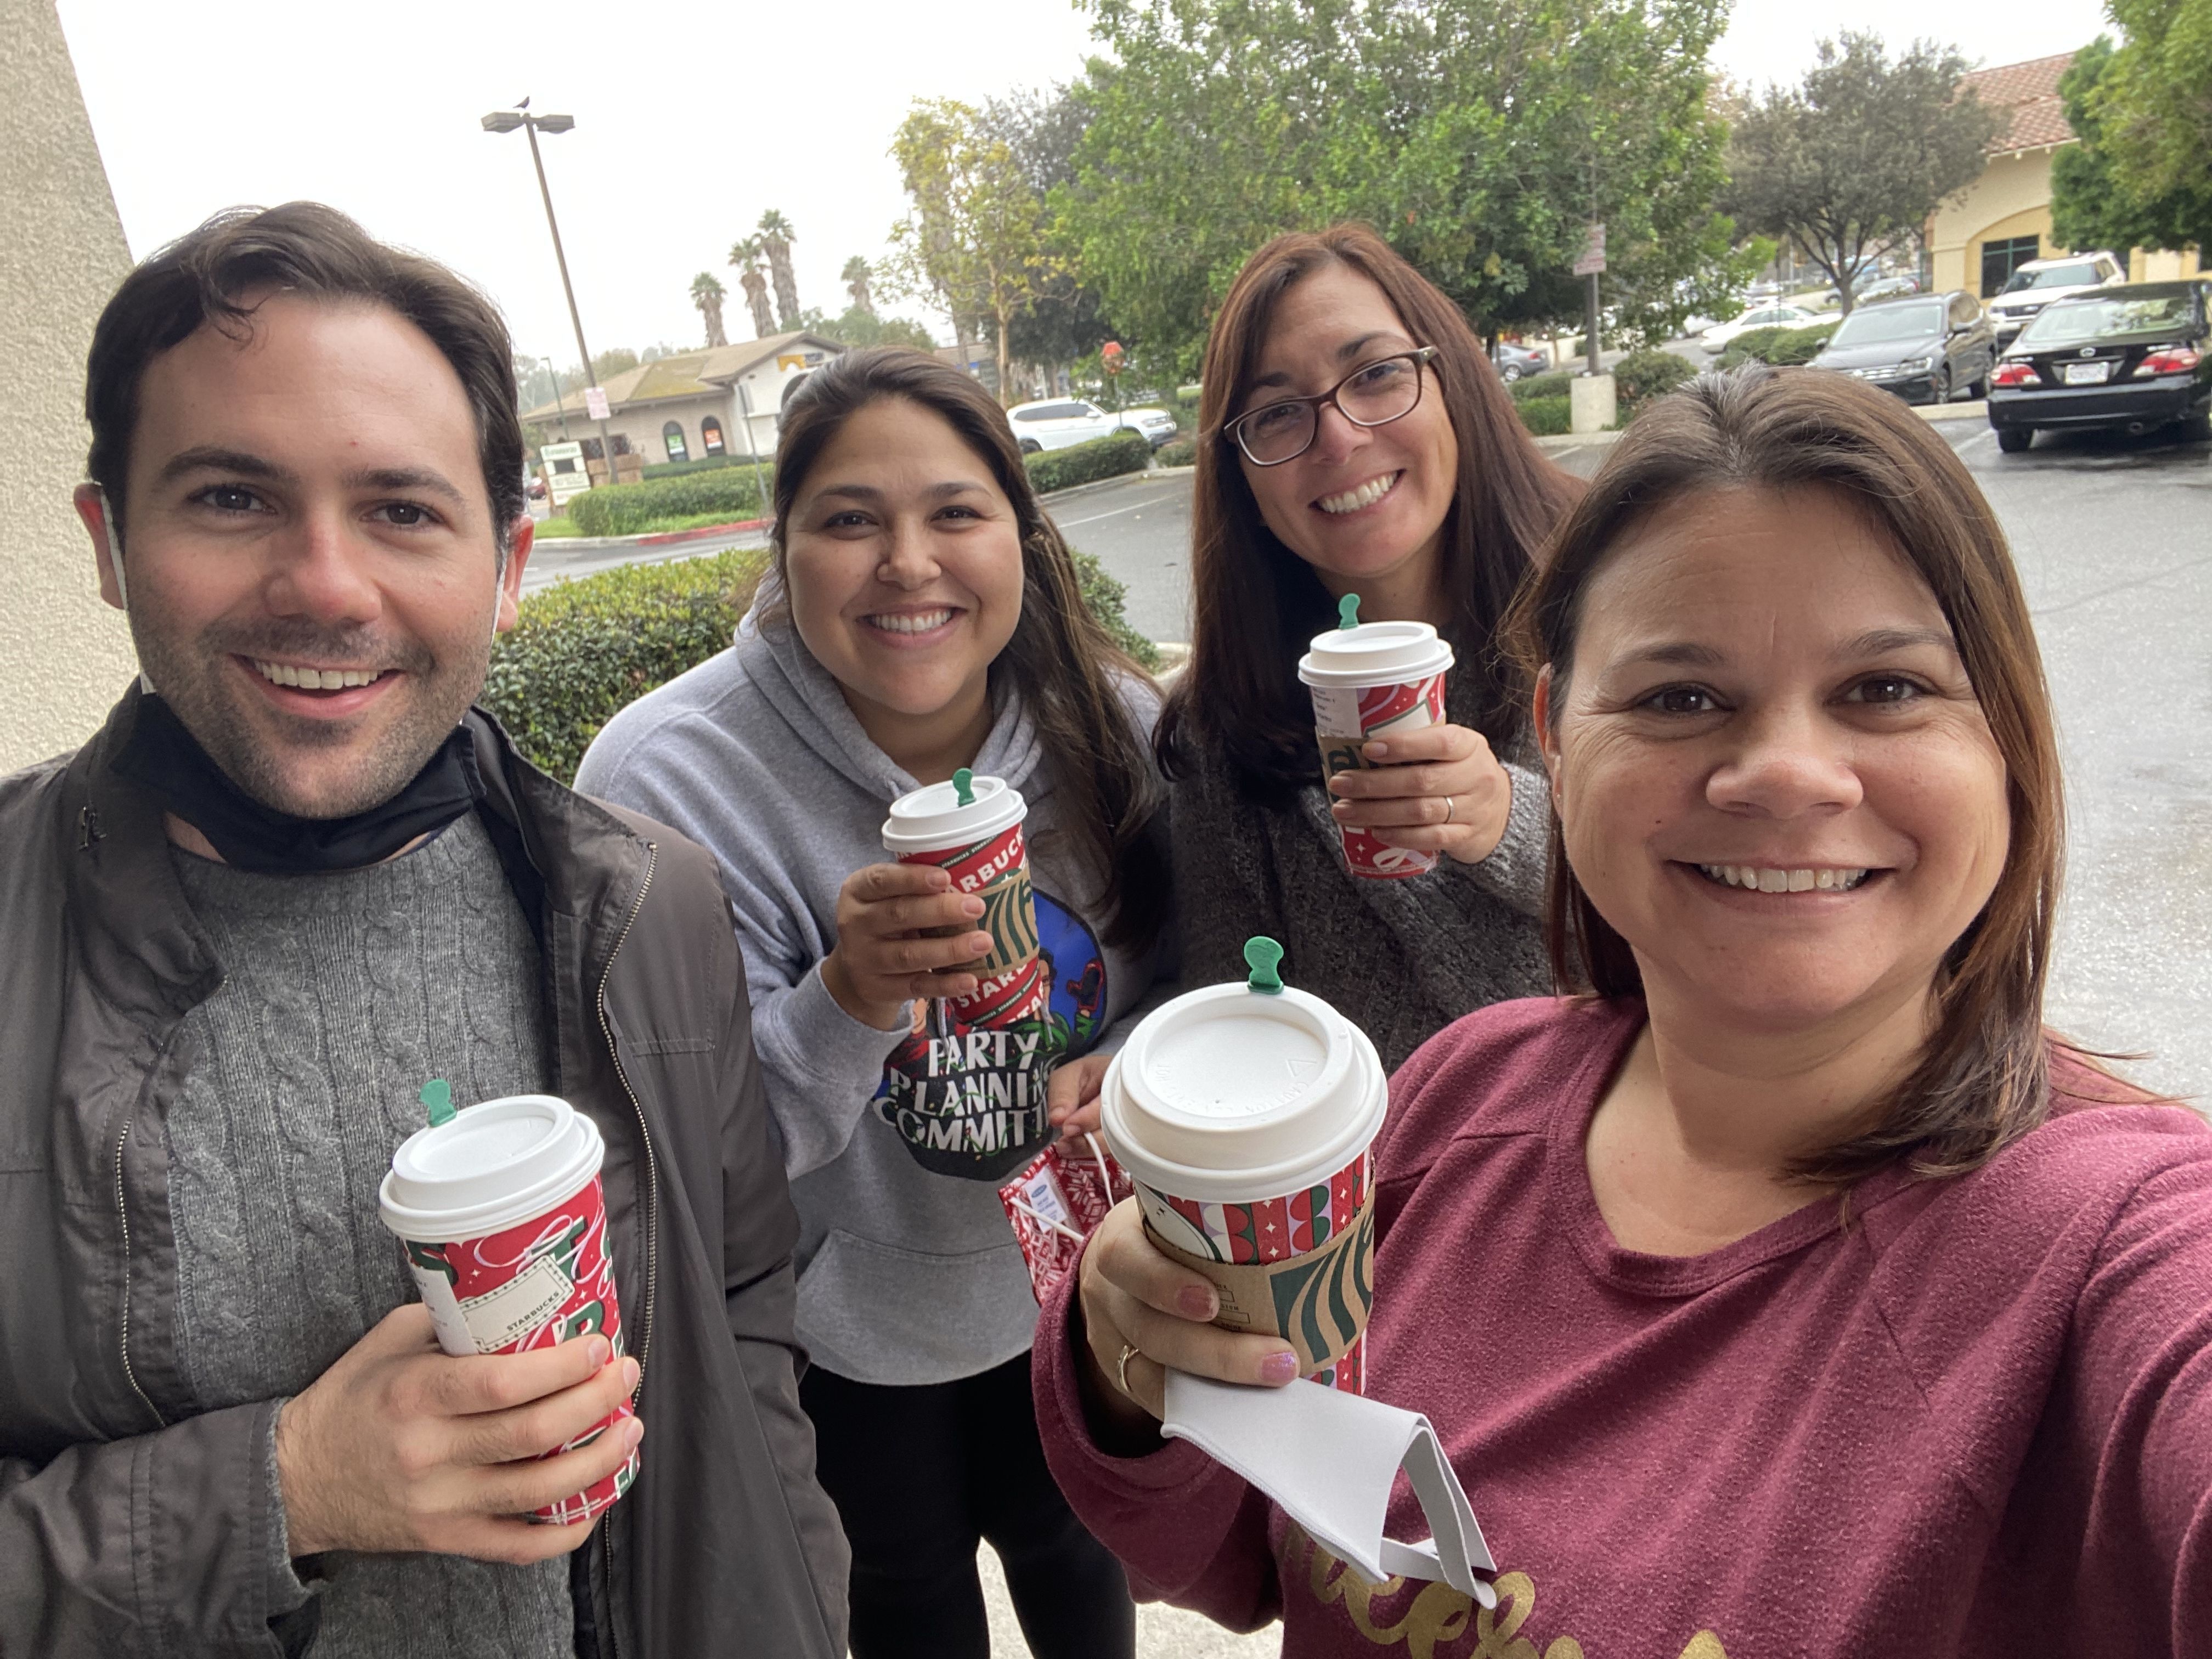 Four of our team members grabbing a coffee, taking a selfie.